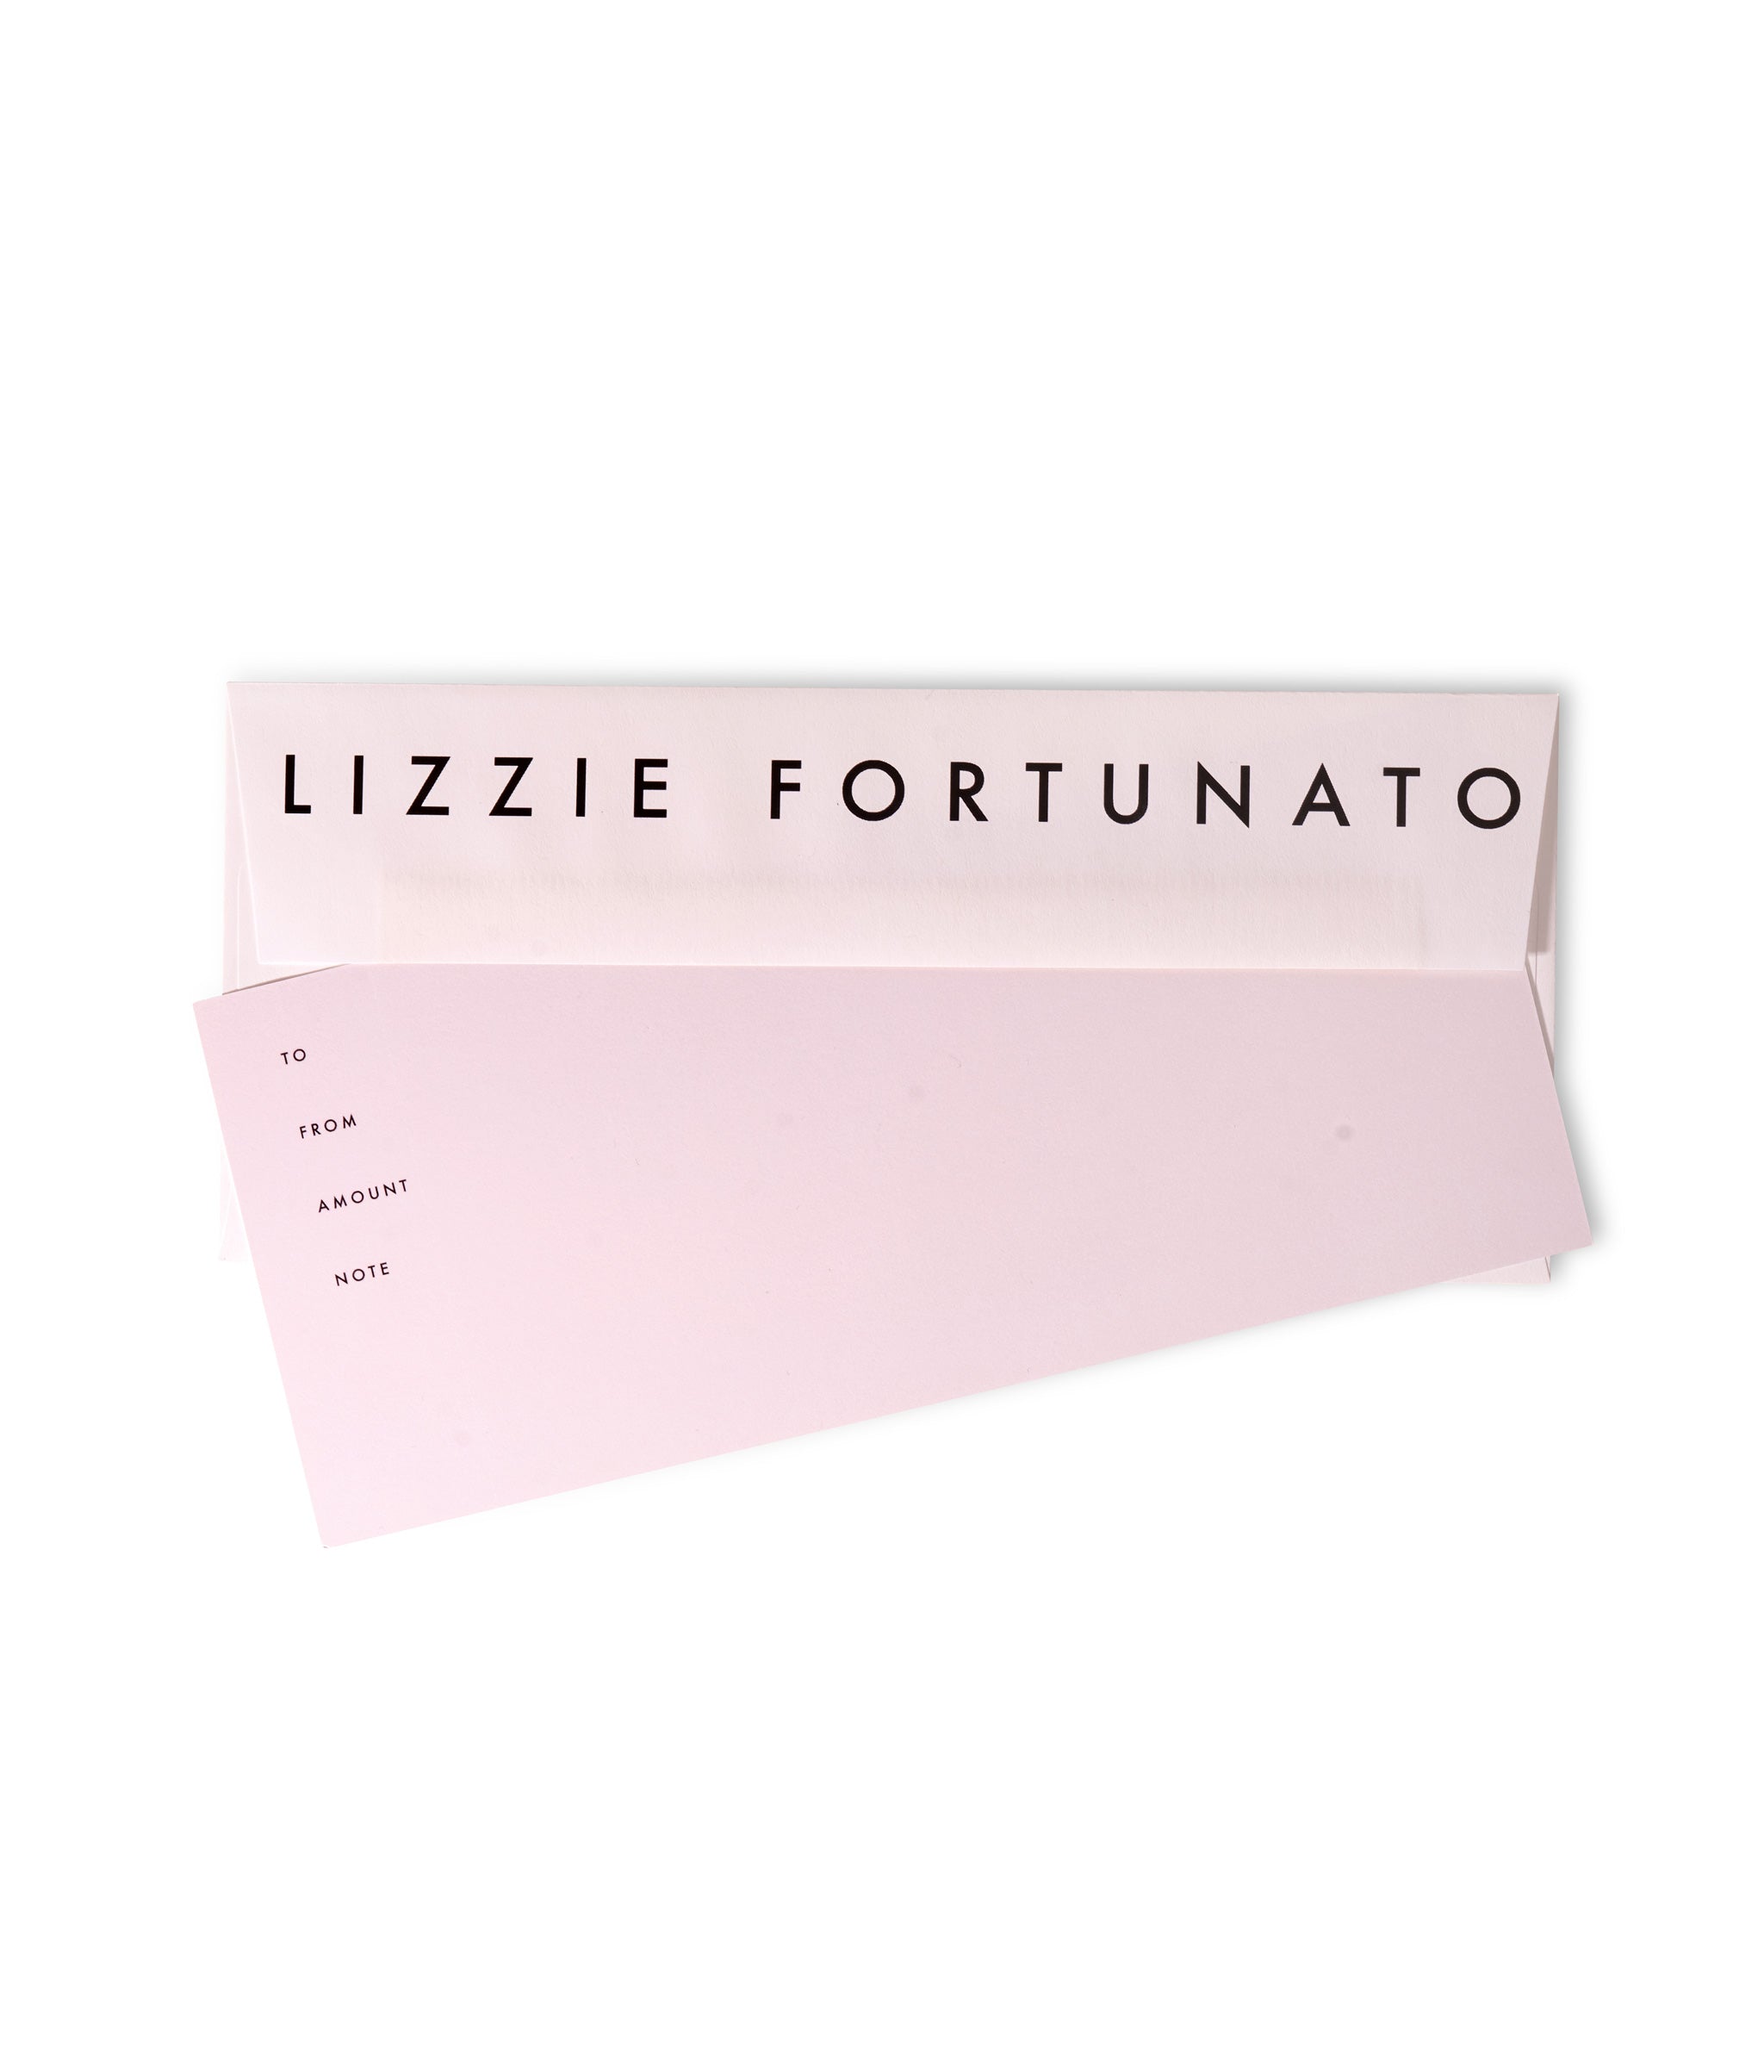 Gift Card. White Lizzie Fortunato envelope with light pink rectangular gift card.